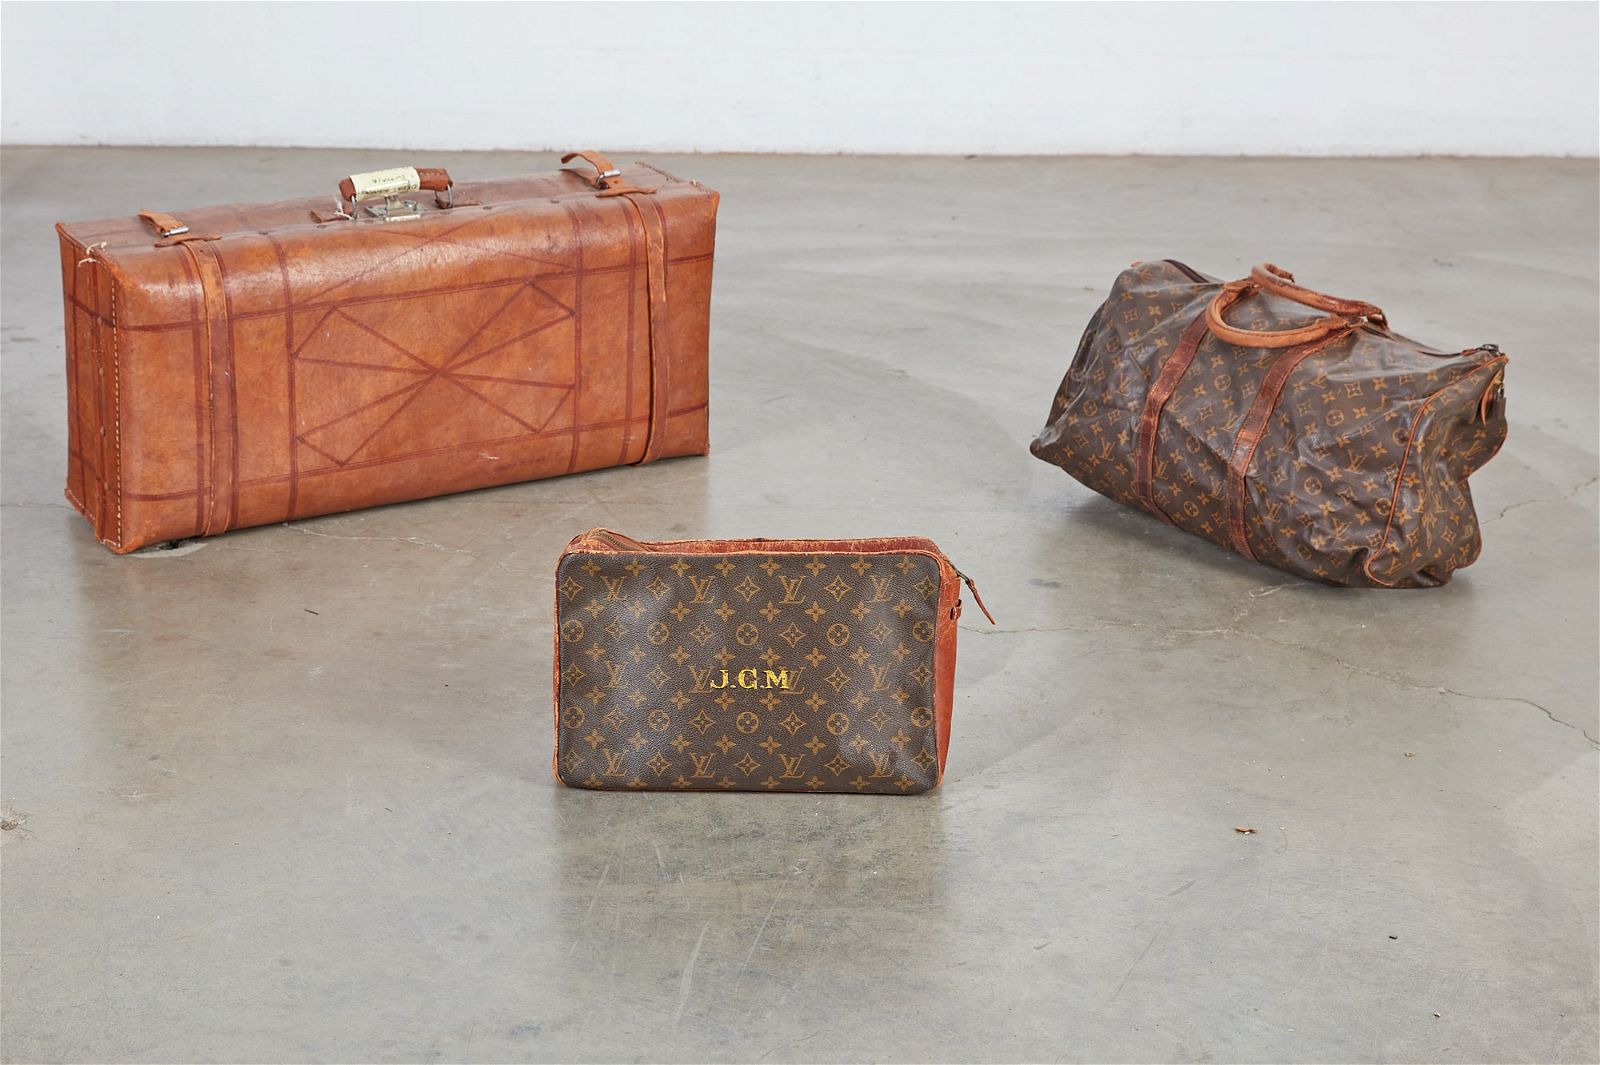 TWO PIECES OF LOUIS VUITTON LUGGAGETwo